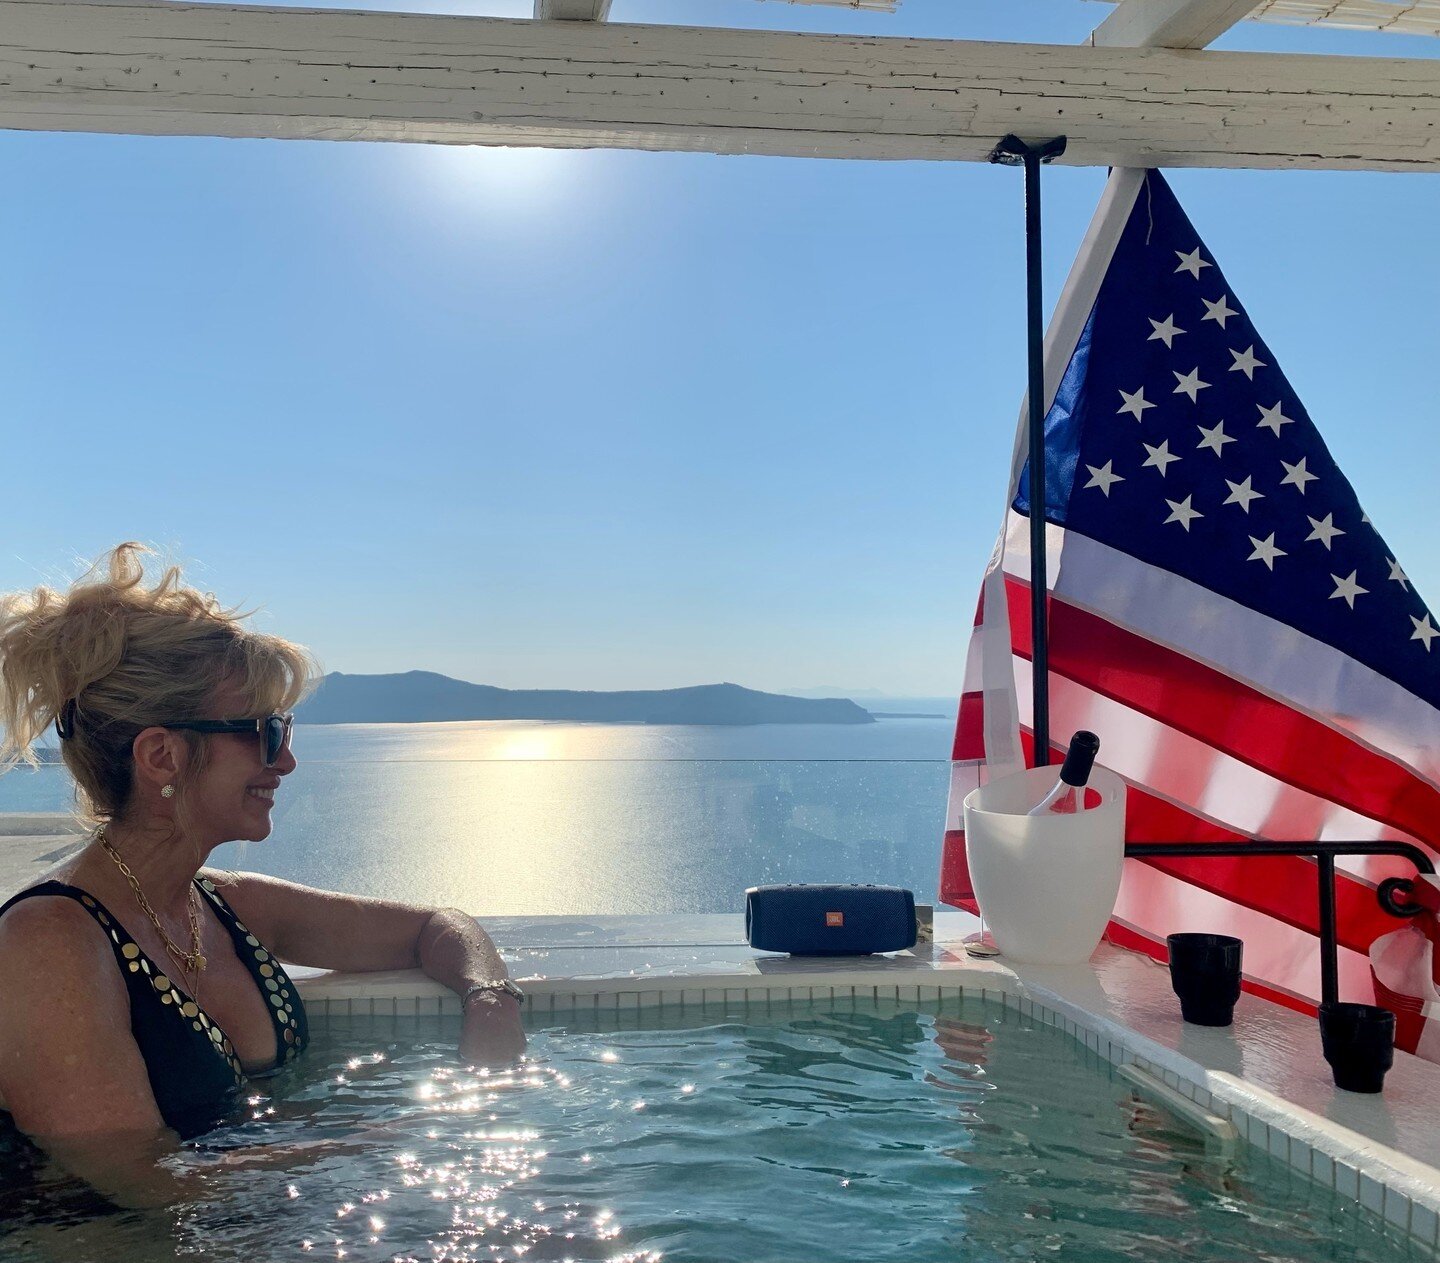 Soaking up the last days of Summer and wishing everyone a magnificent Labor Day weekend! ☀️🇺🇸⁠
⁠
⁠
⁠
#labordayweekend #ldw #summer #usa #fbf #flashbackfriday #vacation